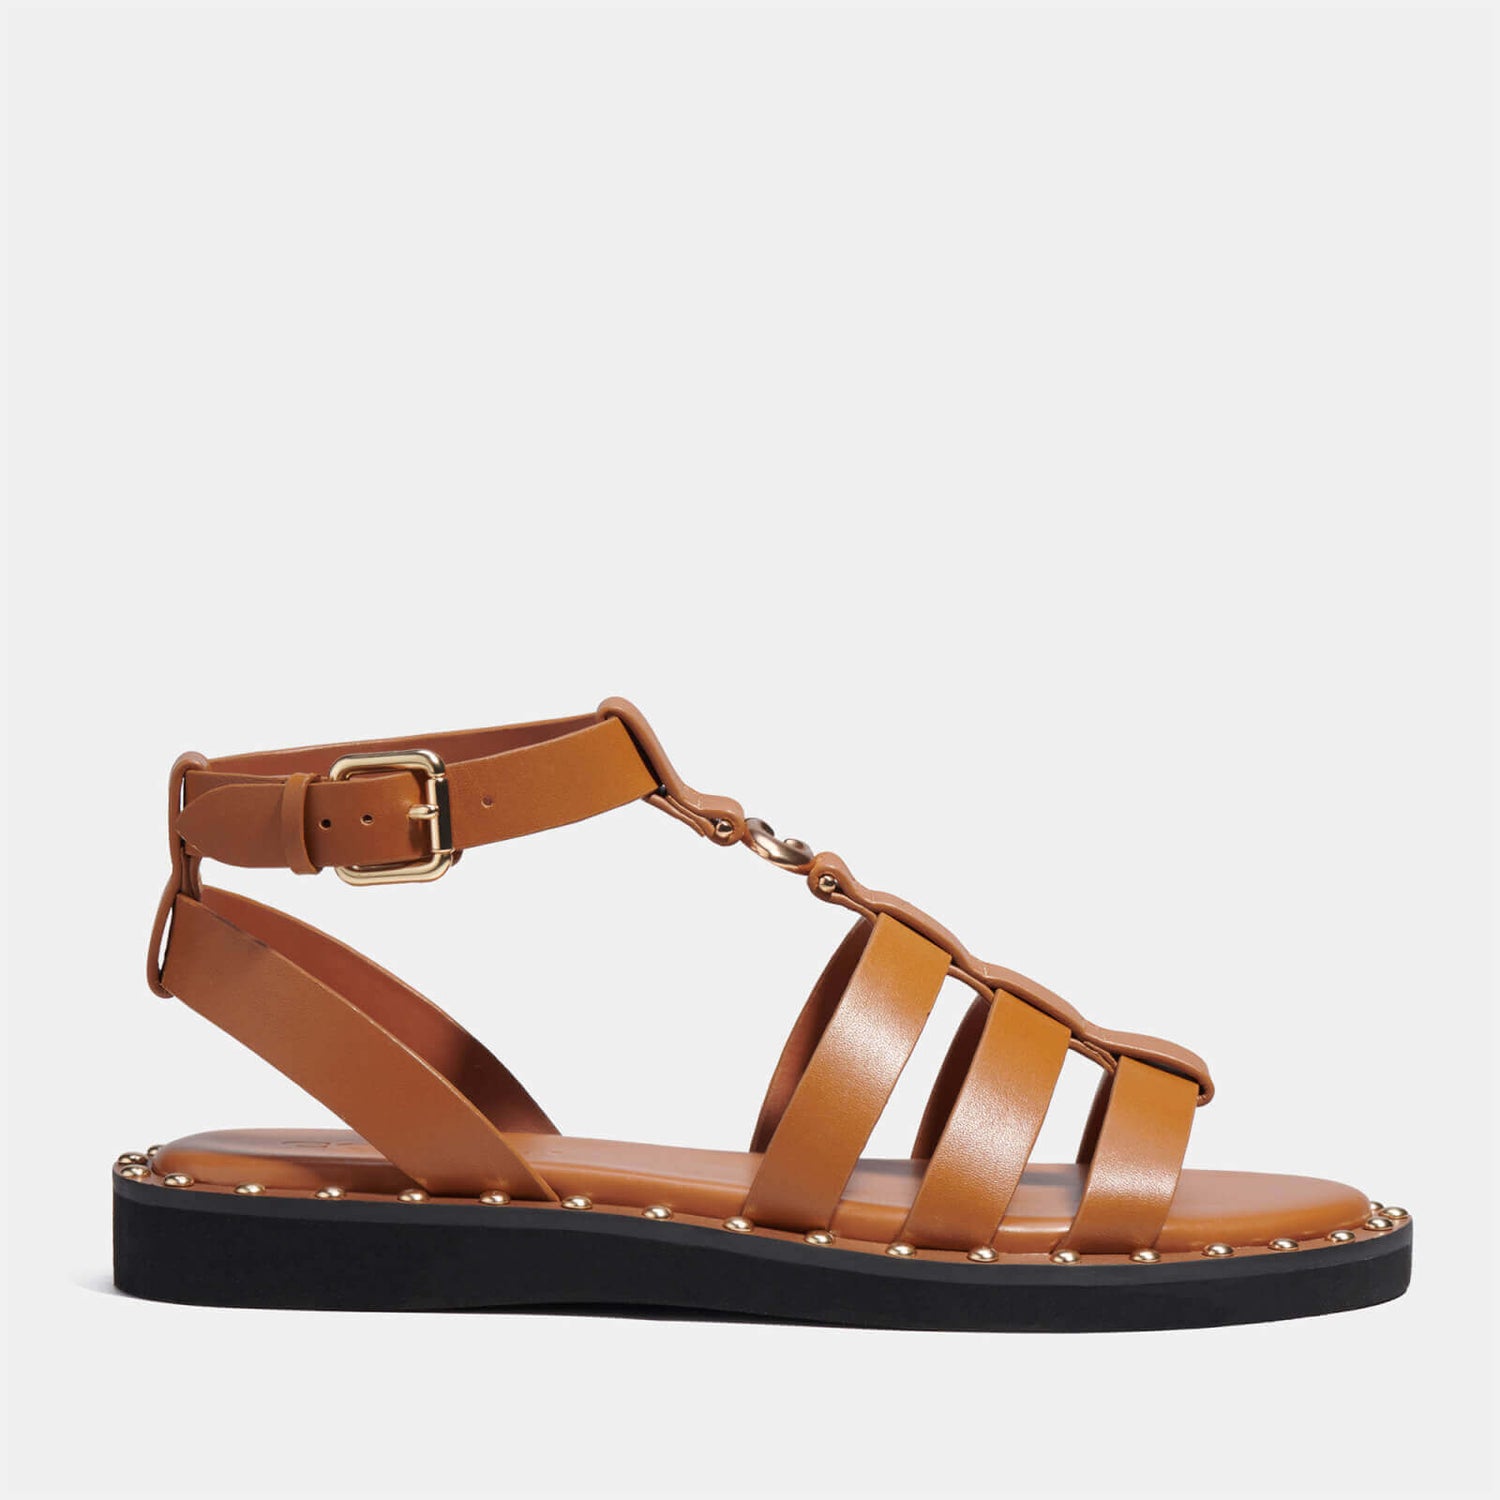 Coach Giselle Leather Sandals